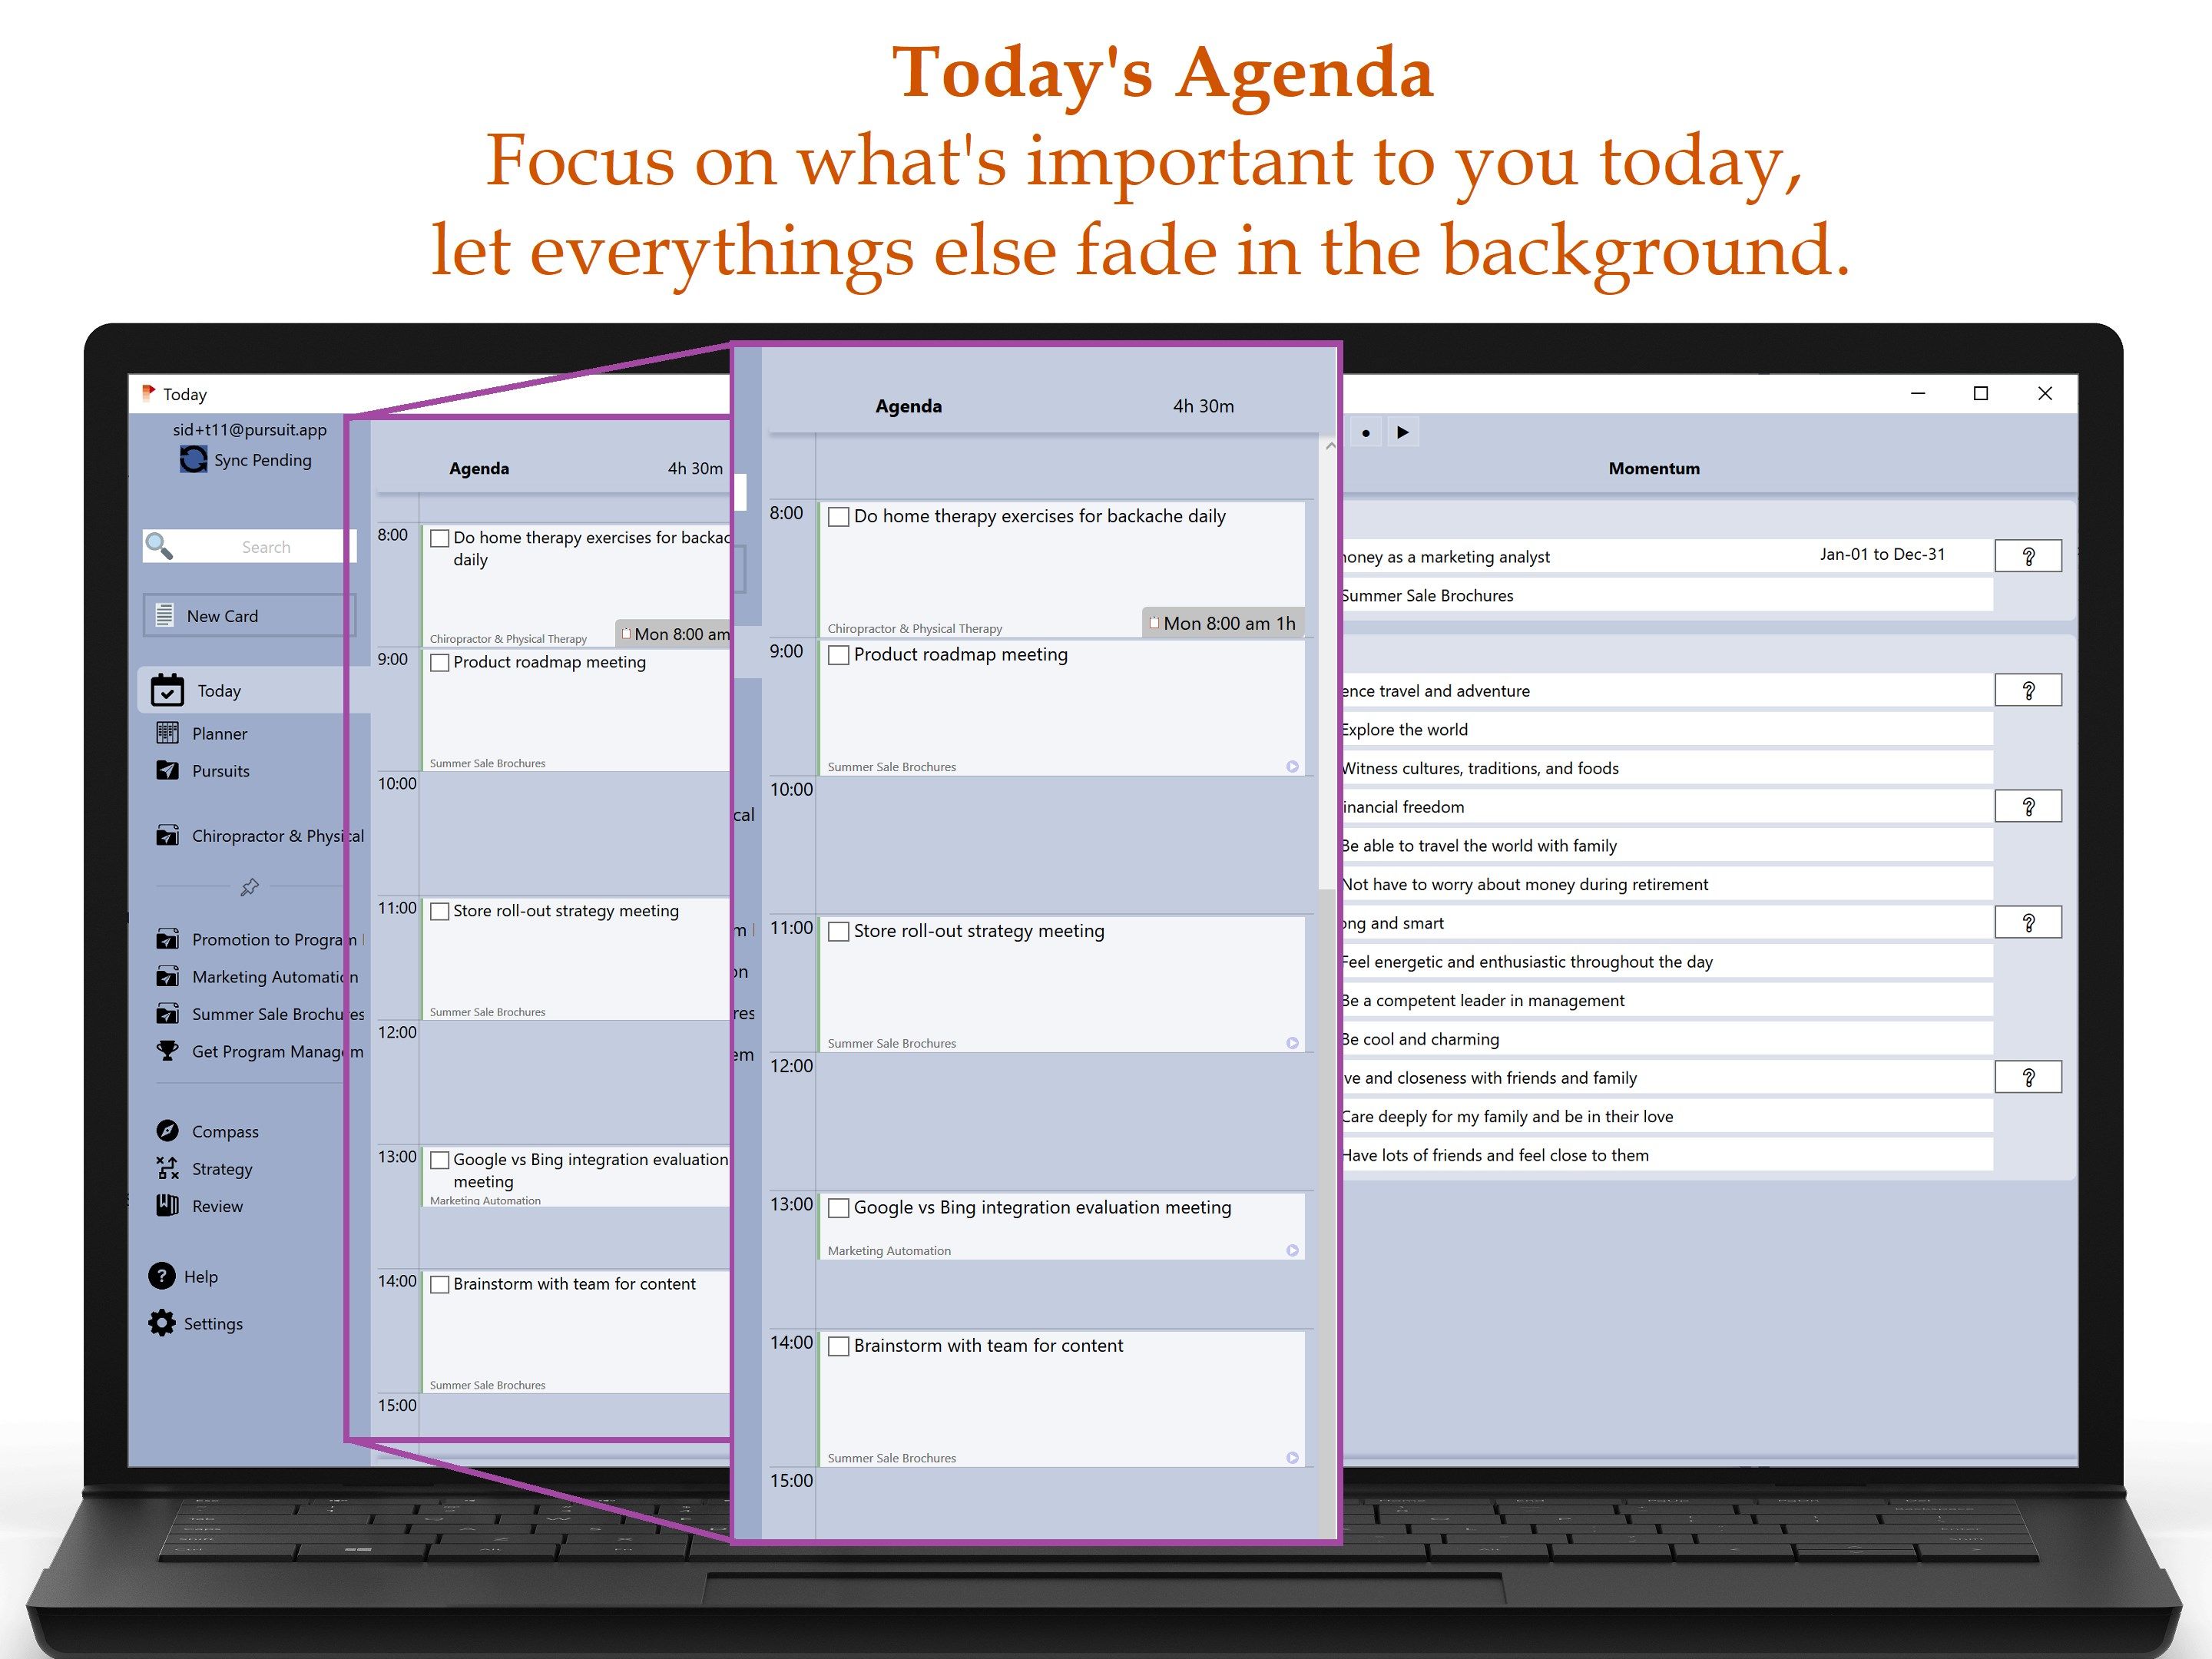 Today's Agenda: Focus on what's Important to you today, let everything else fade in the background.